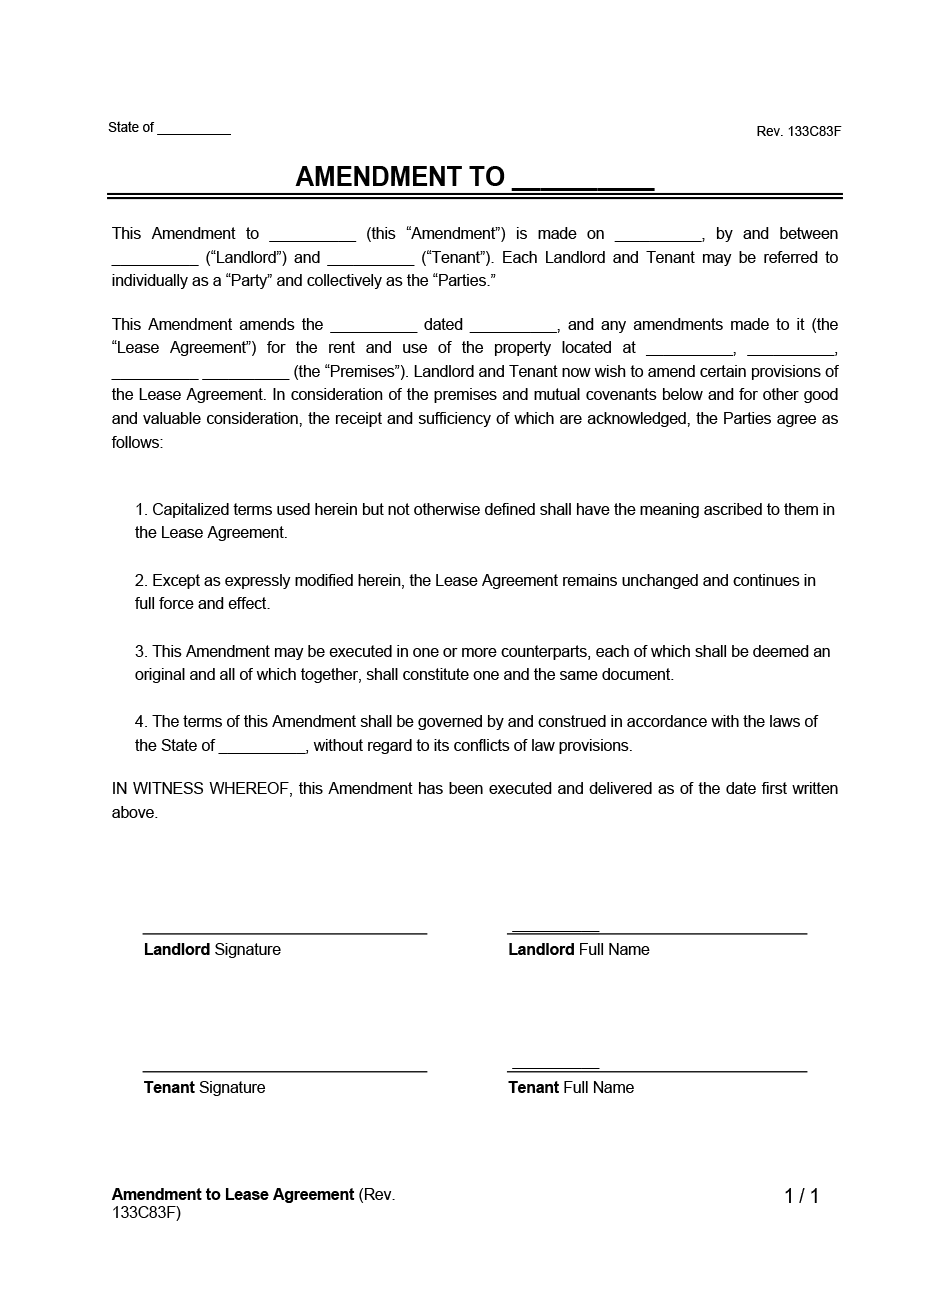 Amendment to Lease Agreement Example Form